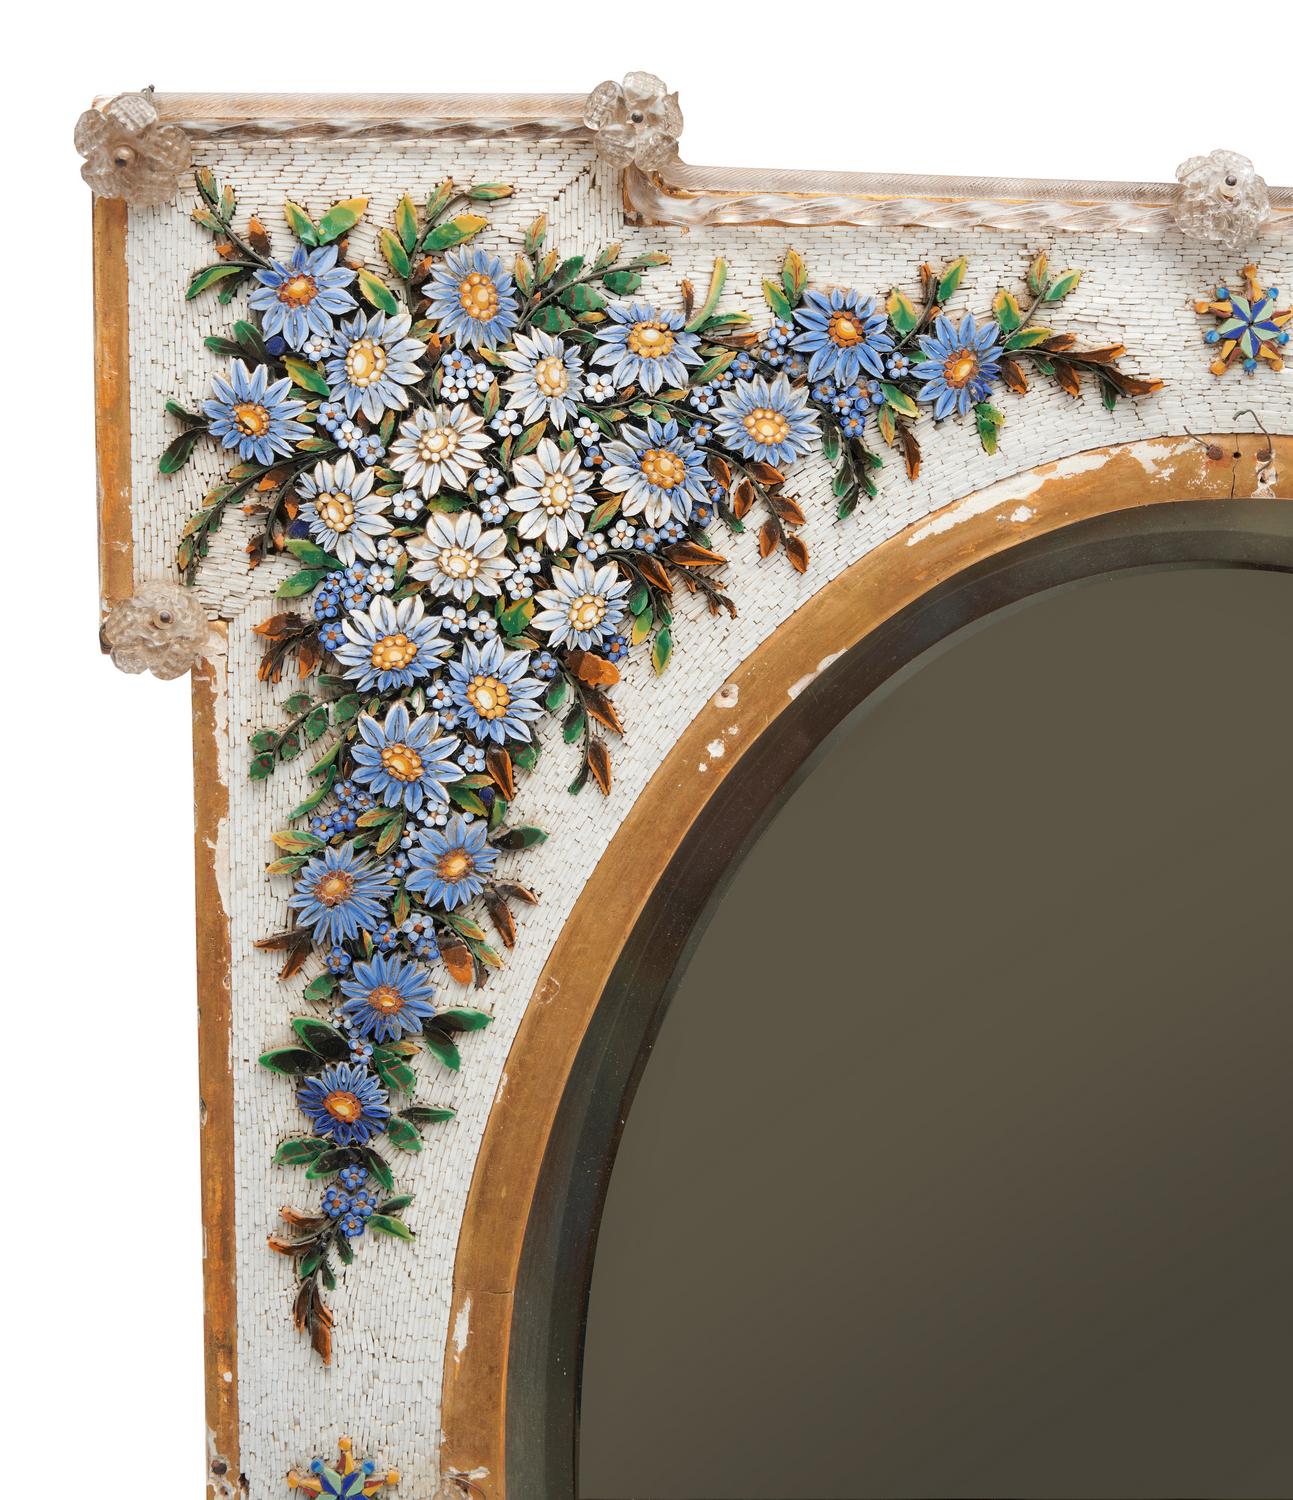 A Venetian Micromosaic-Framed Mirror, Late 19th century

The oval plate within an eared rectangular frame decorated with applied mosaic flowers and glass details.

Provenance: Private New South Wales Collection.